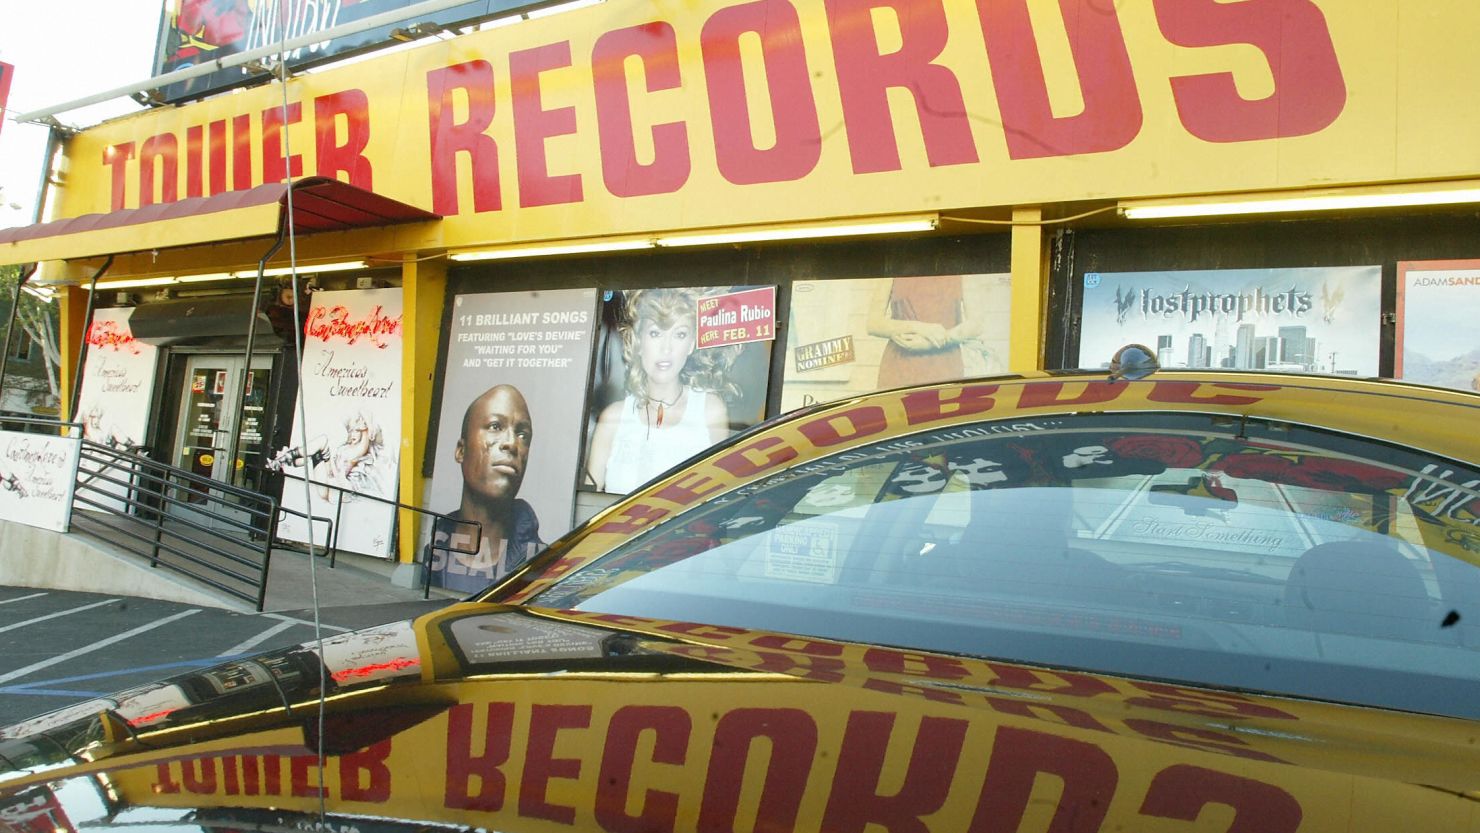 The entrance to a Tower Records store in Hollywood in February 2004.